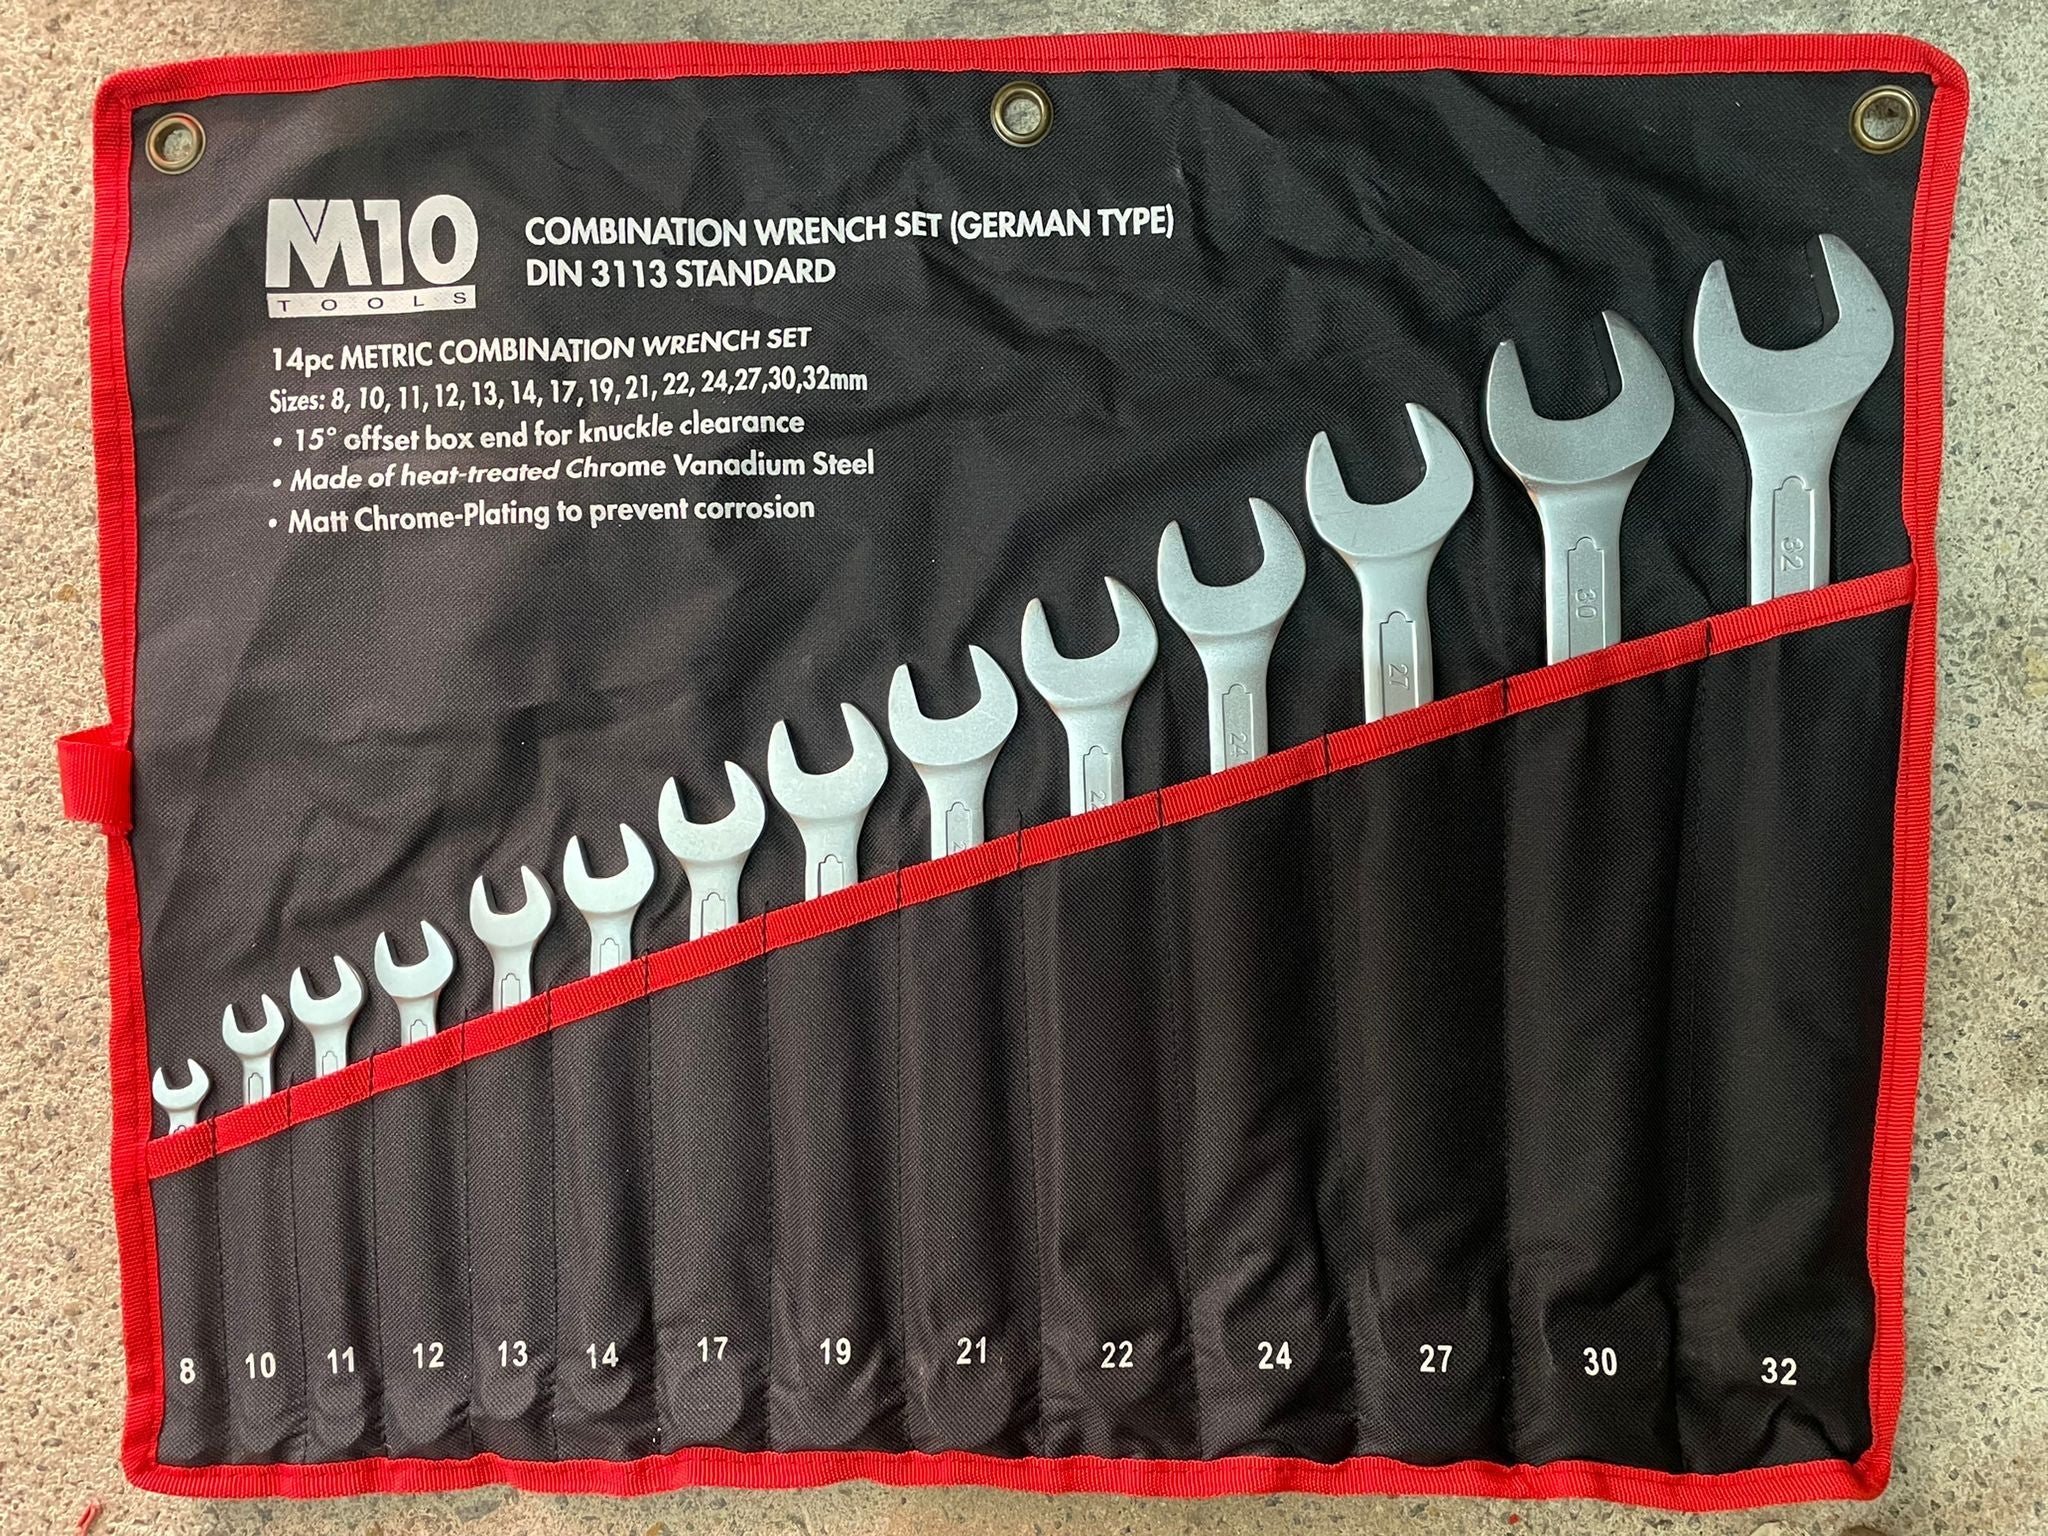 M10 005-011-114 8-32mm Combination Wrench Set With Box 14pcs Model